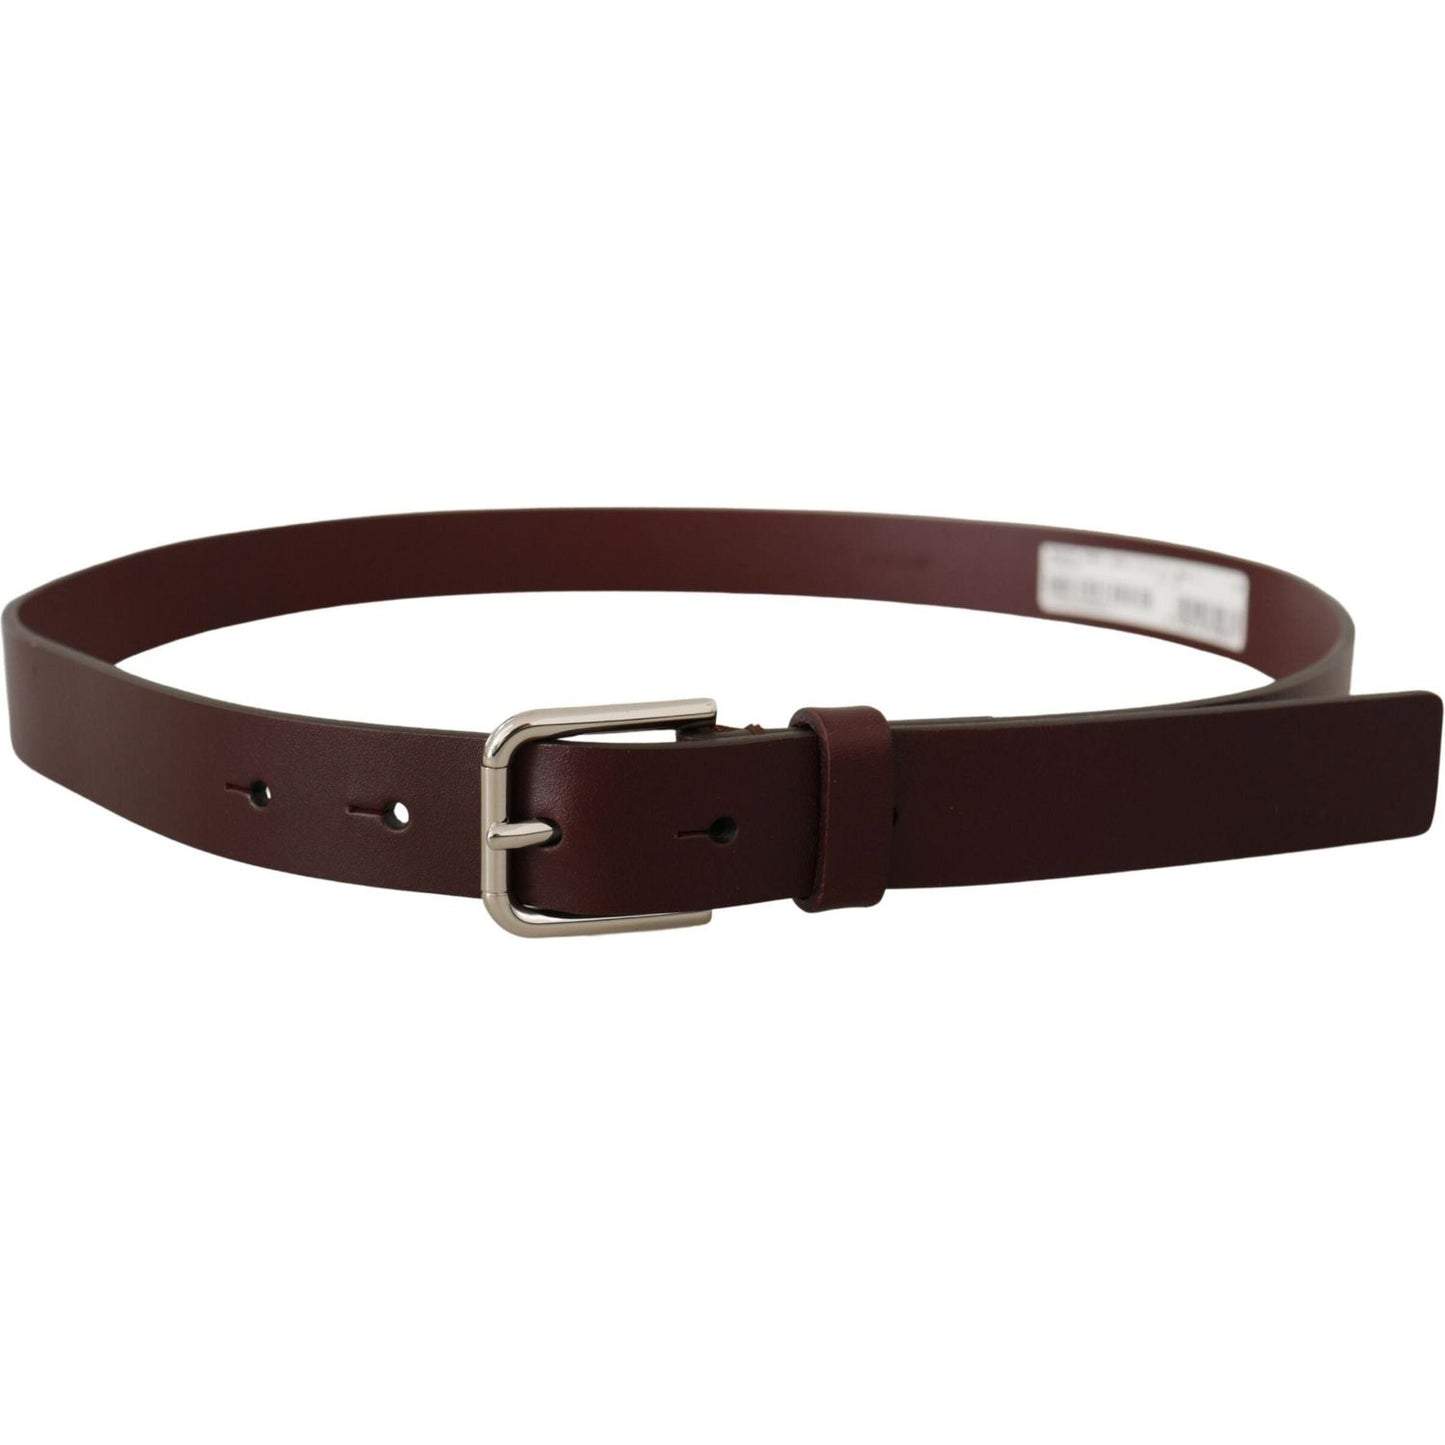 Dolce & Gabbana Maroon Luxe Leather Belt with Metal Buckle maroon-calf-leather-silver-tone-metal-buckle-belt-1 IMG_7134-scaled-9a595adc-e94.jpg